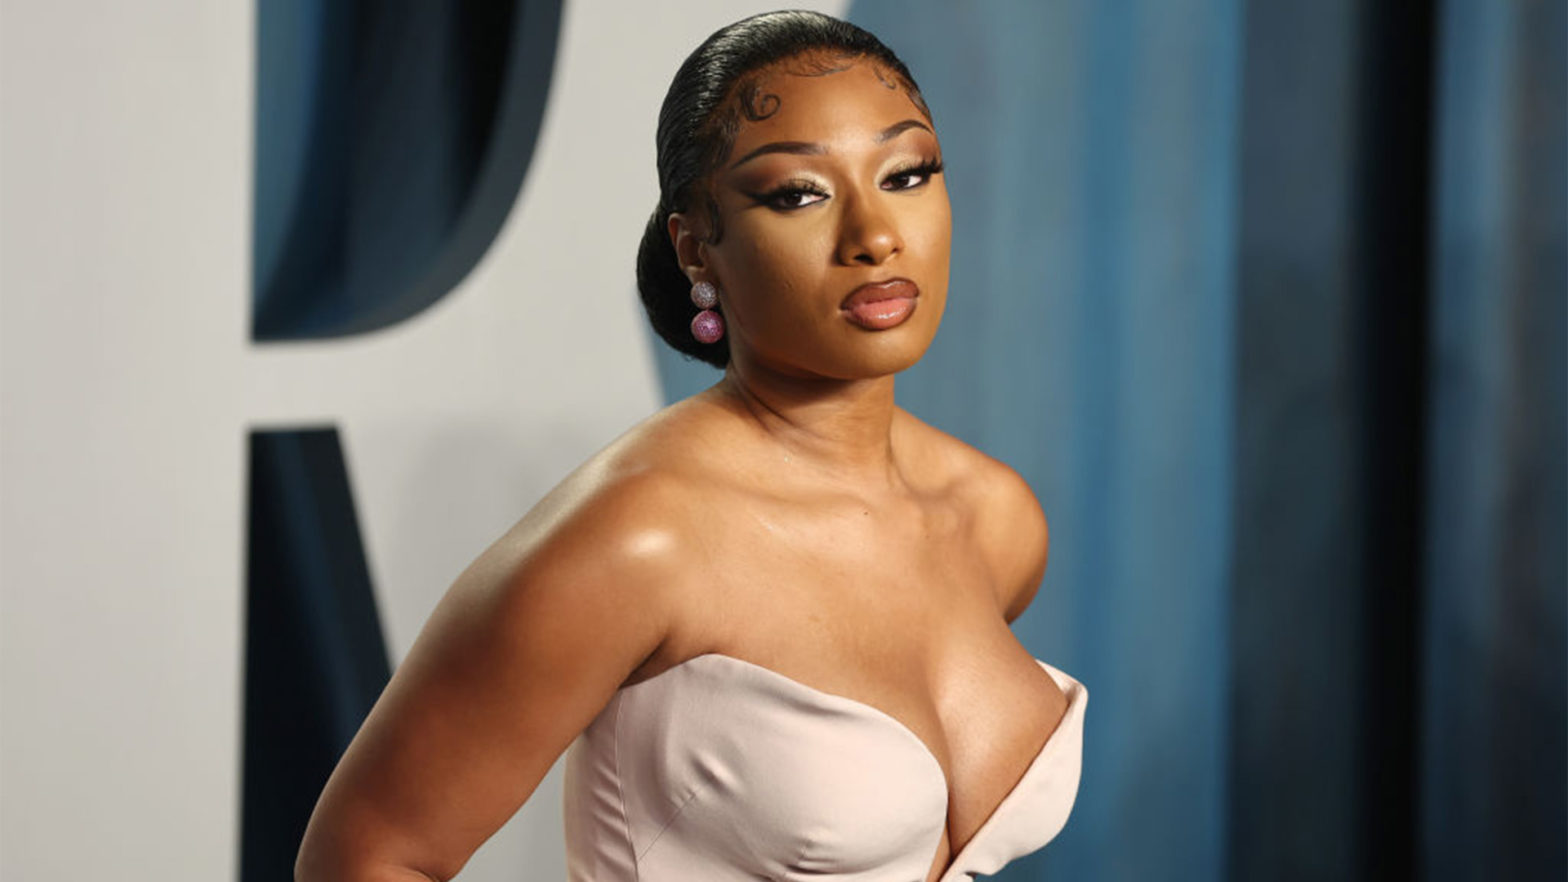 Megan Thee Stallion One Step Closer To Victory In $1M Lawsuit Against Label